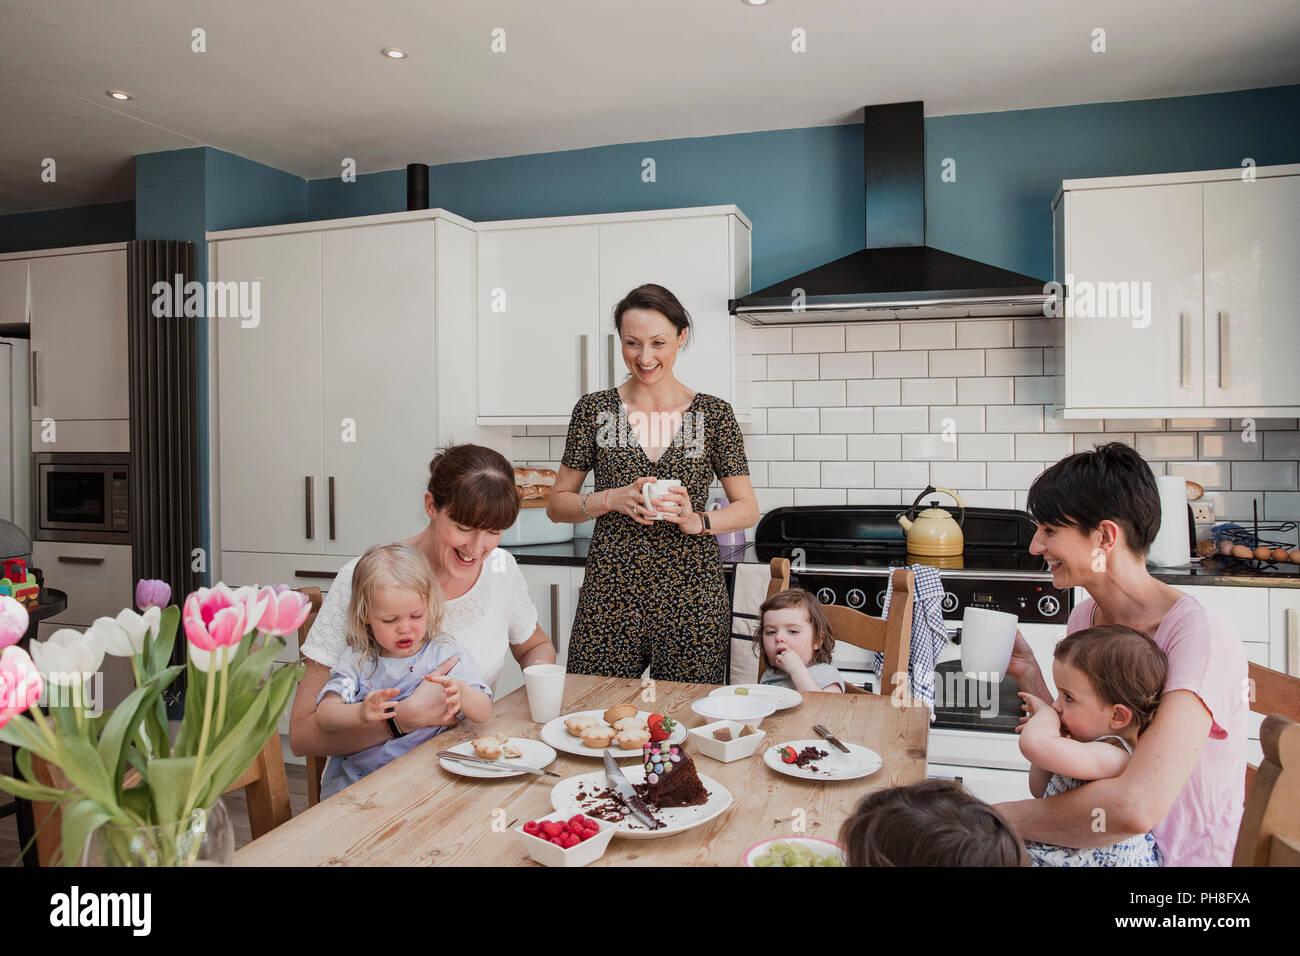 Three mid adult women in a kitchen with their daughters. Two of the women are sitting down with their daughters sitting on their laps while they eat t Stock Photo